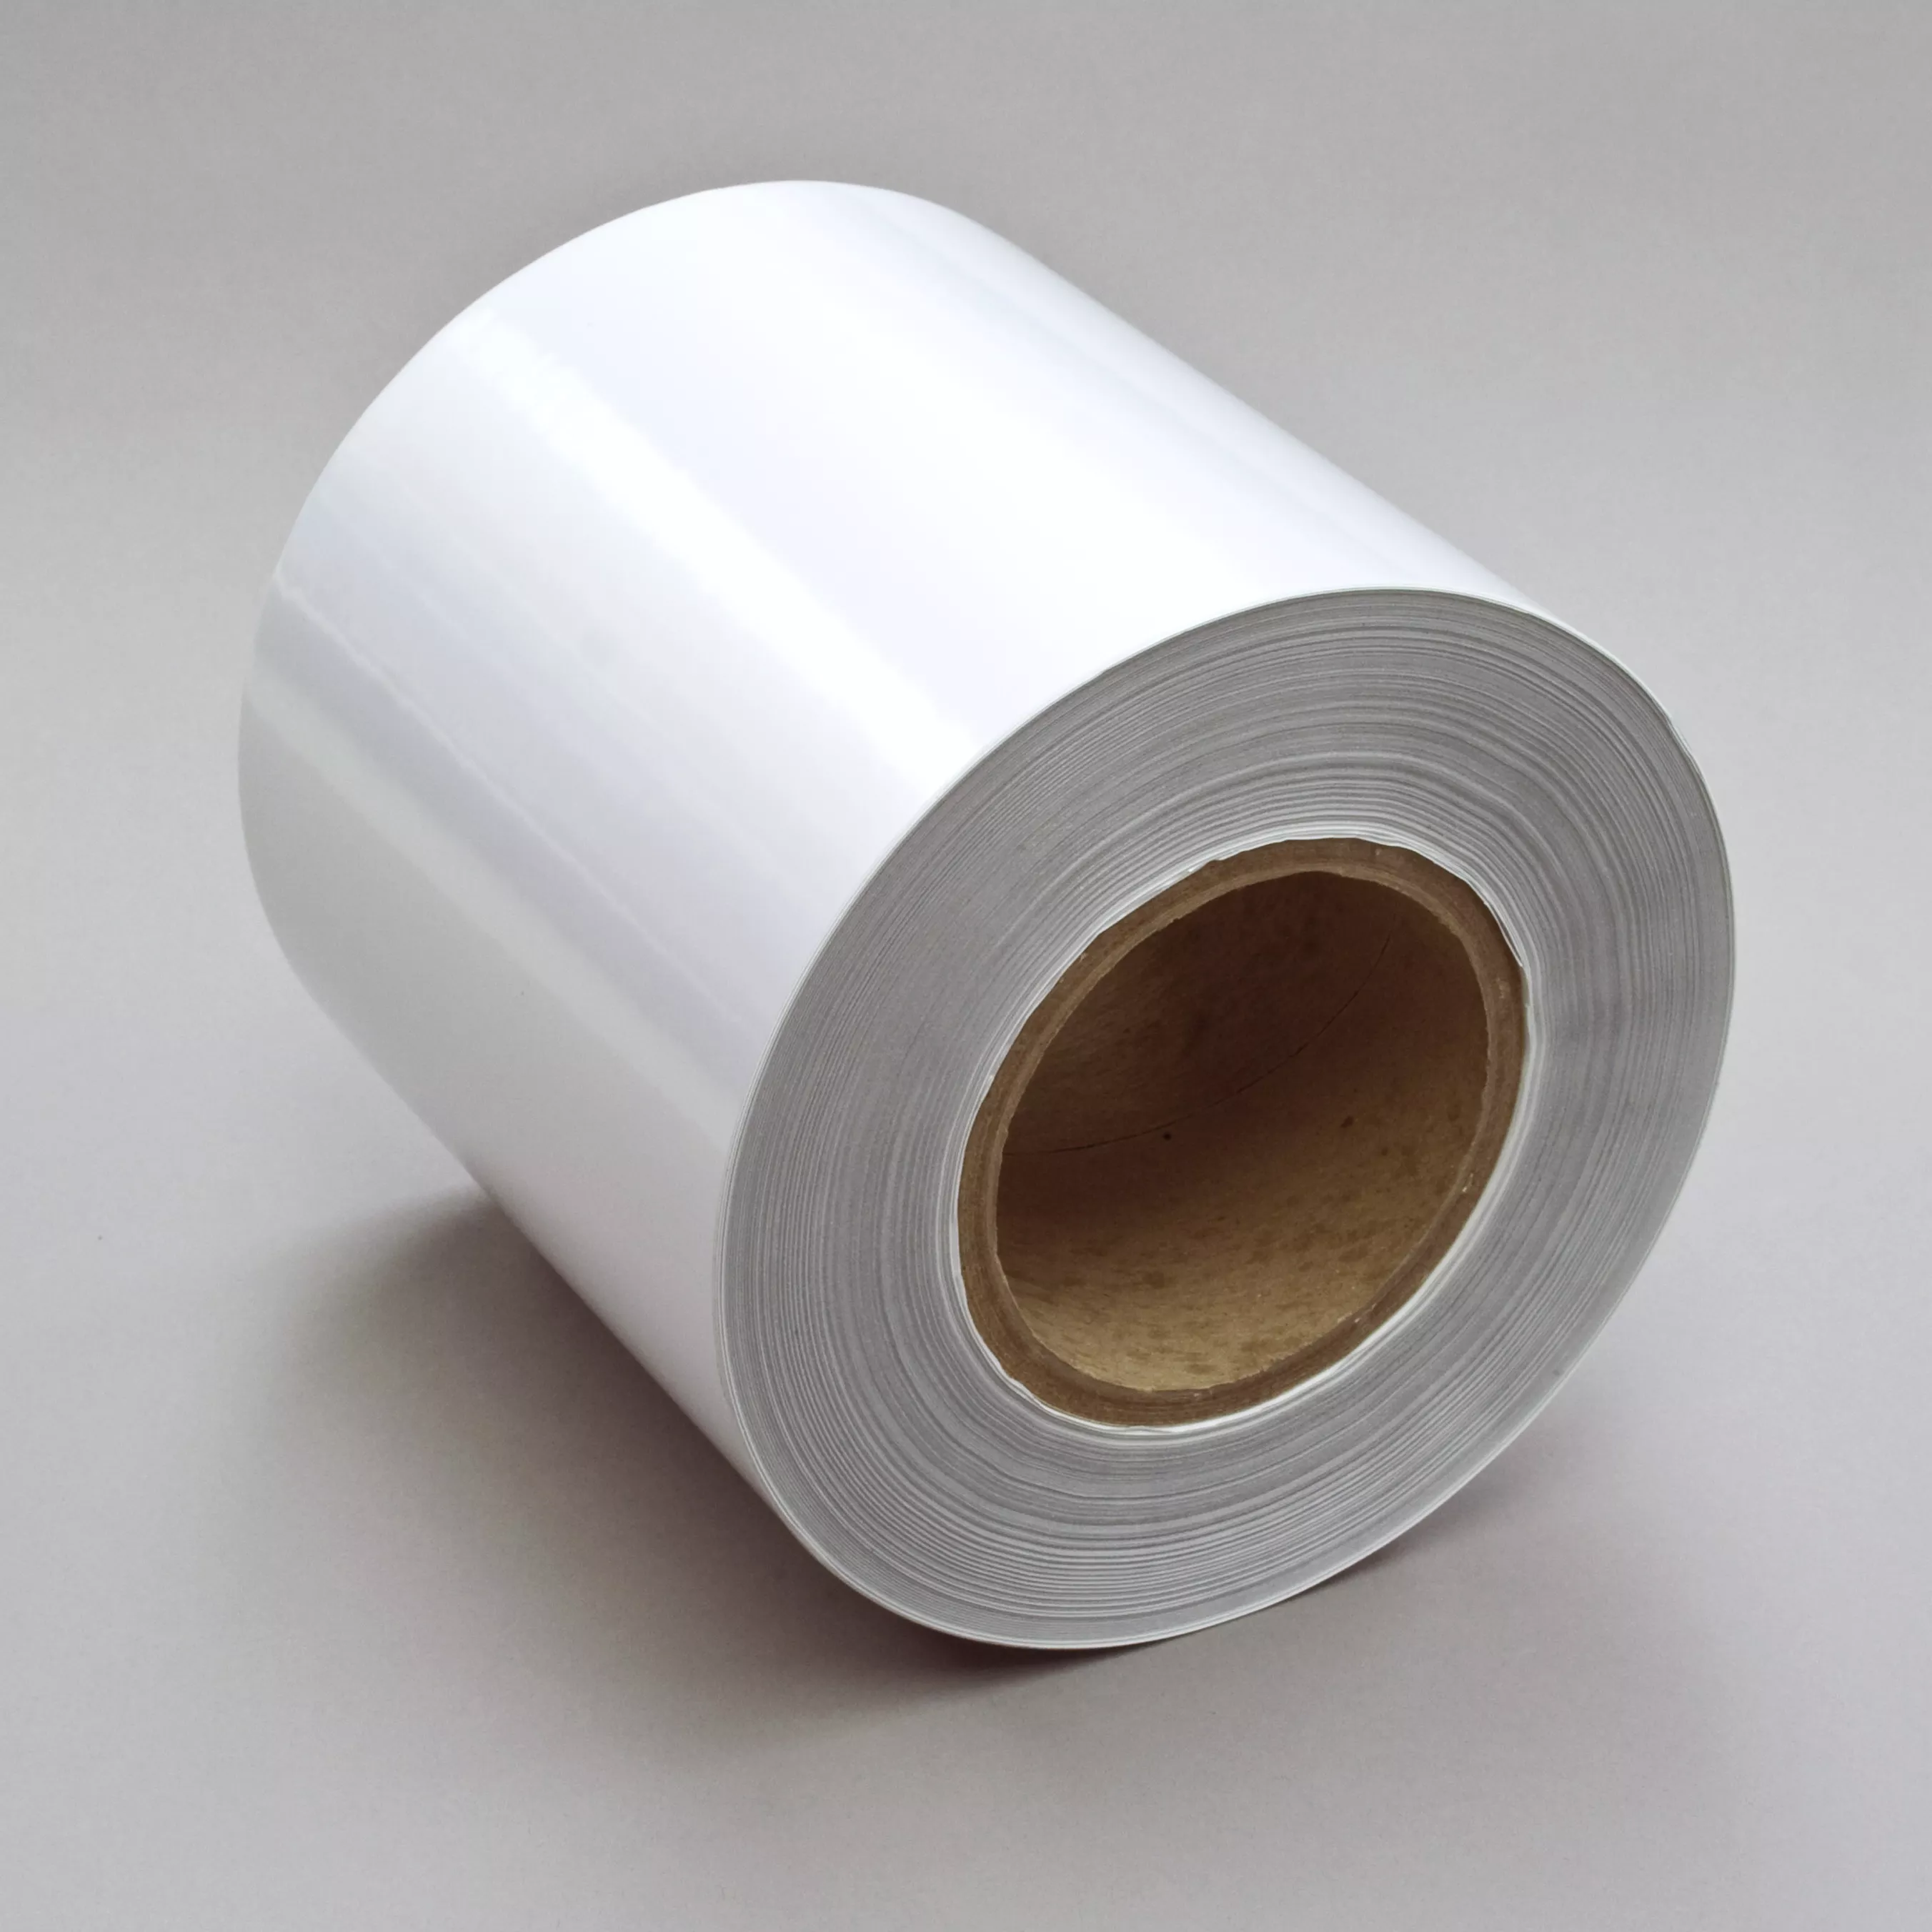 3M™ Thermal Transfer Label Material 7872, Platinum Polyester Gloss, 6 in
x 1668 ft, 1 Roll/Case